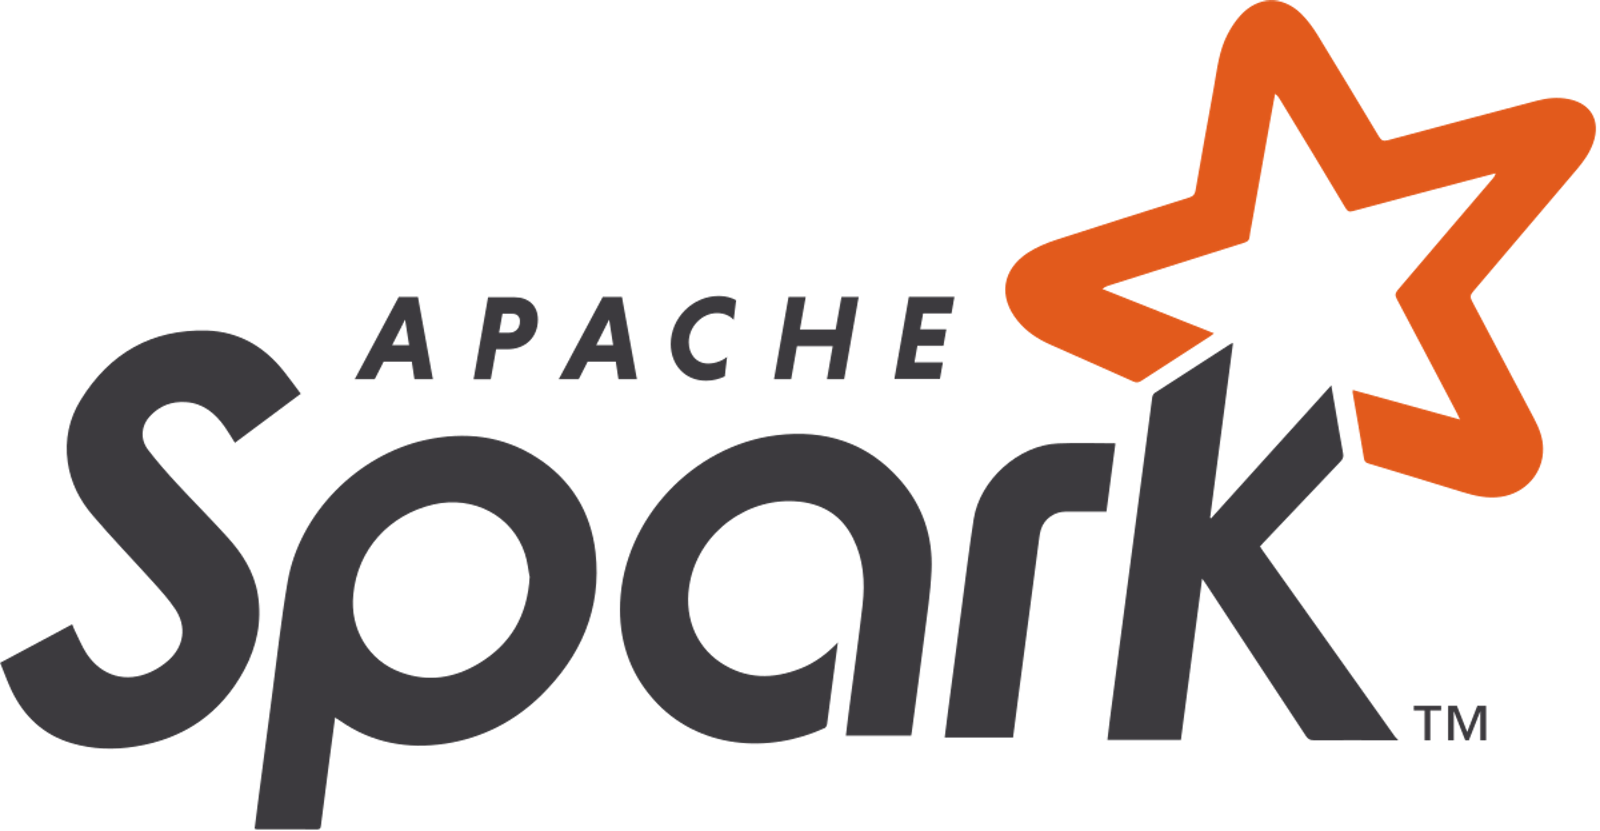 What is Apache Spark?